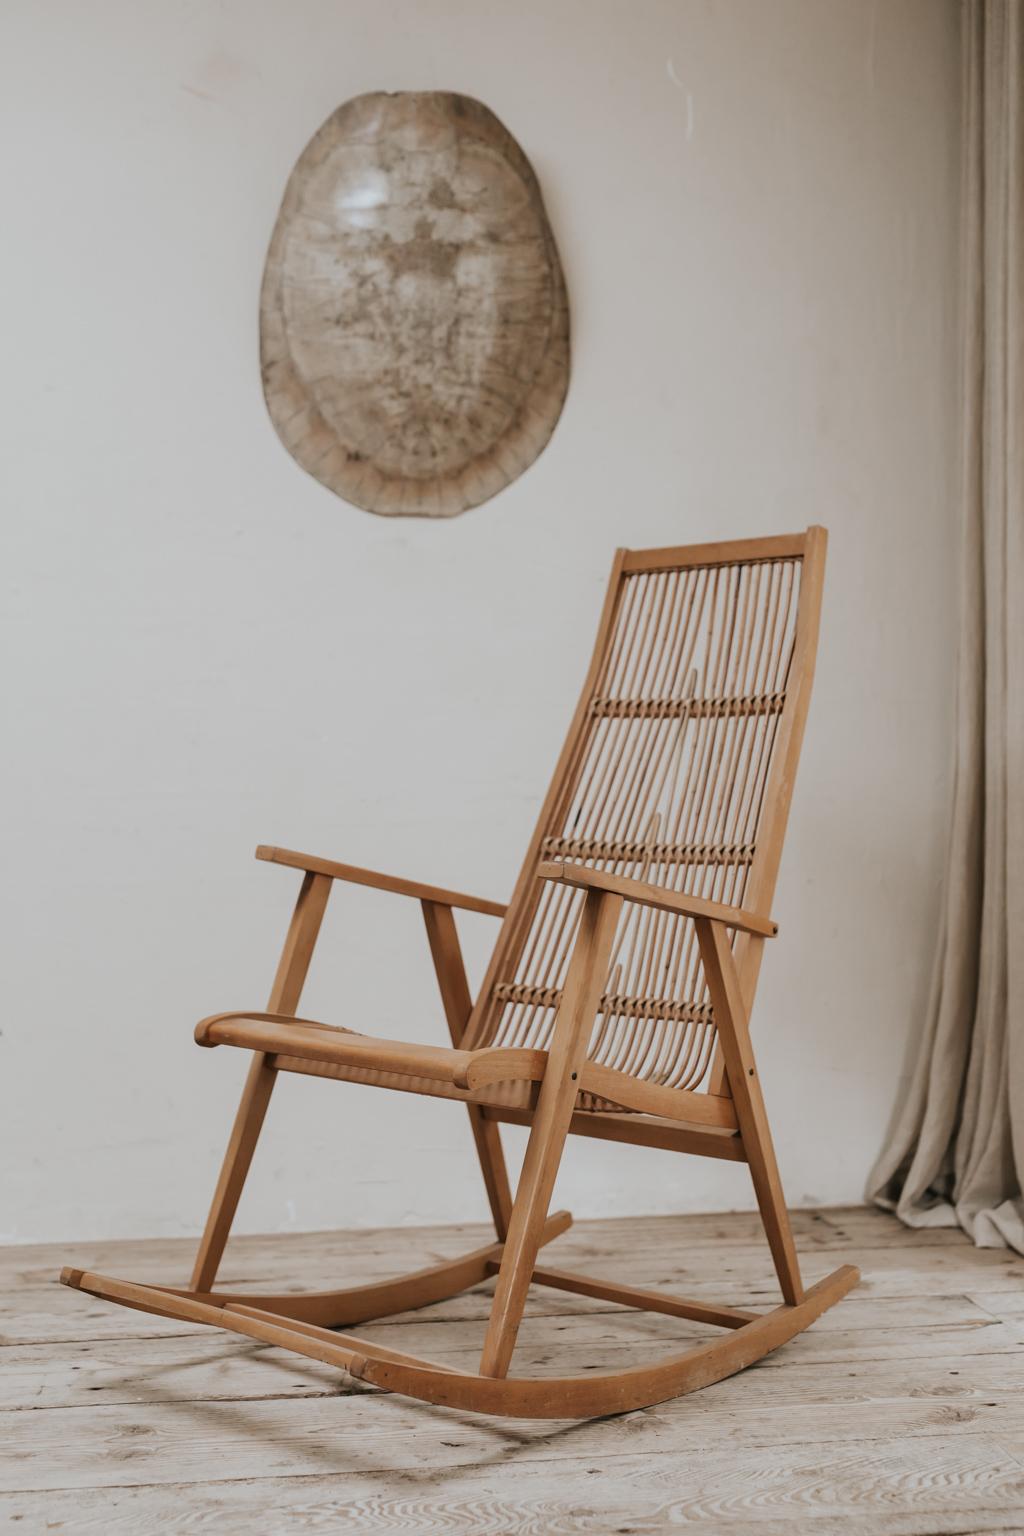 20th Century Vintage Rocking Chair For Sale 3